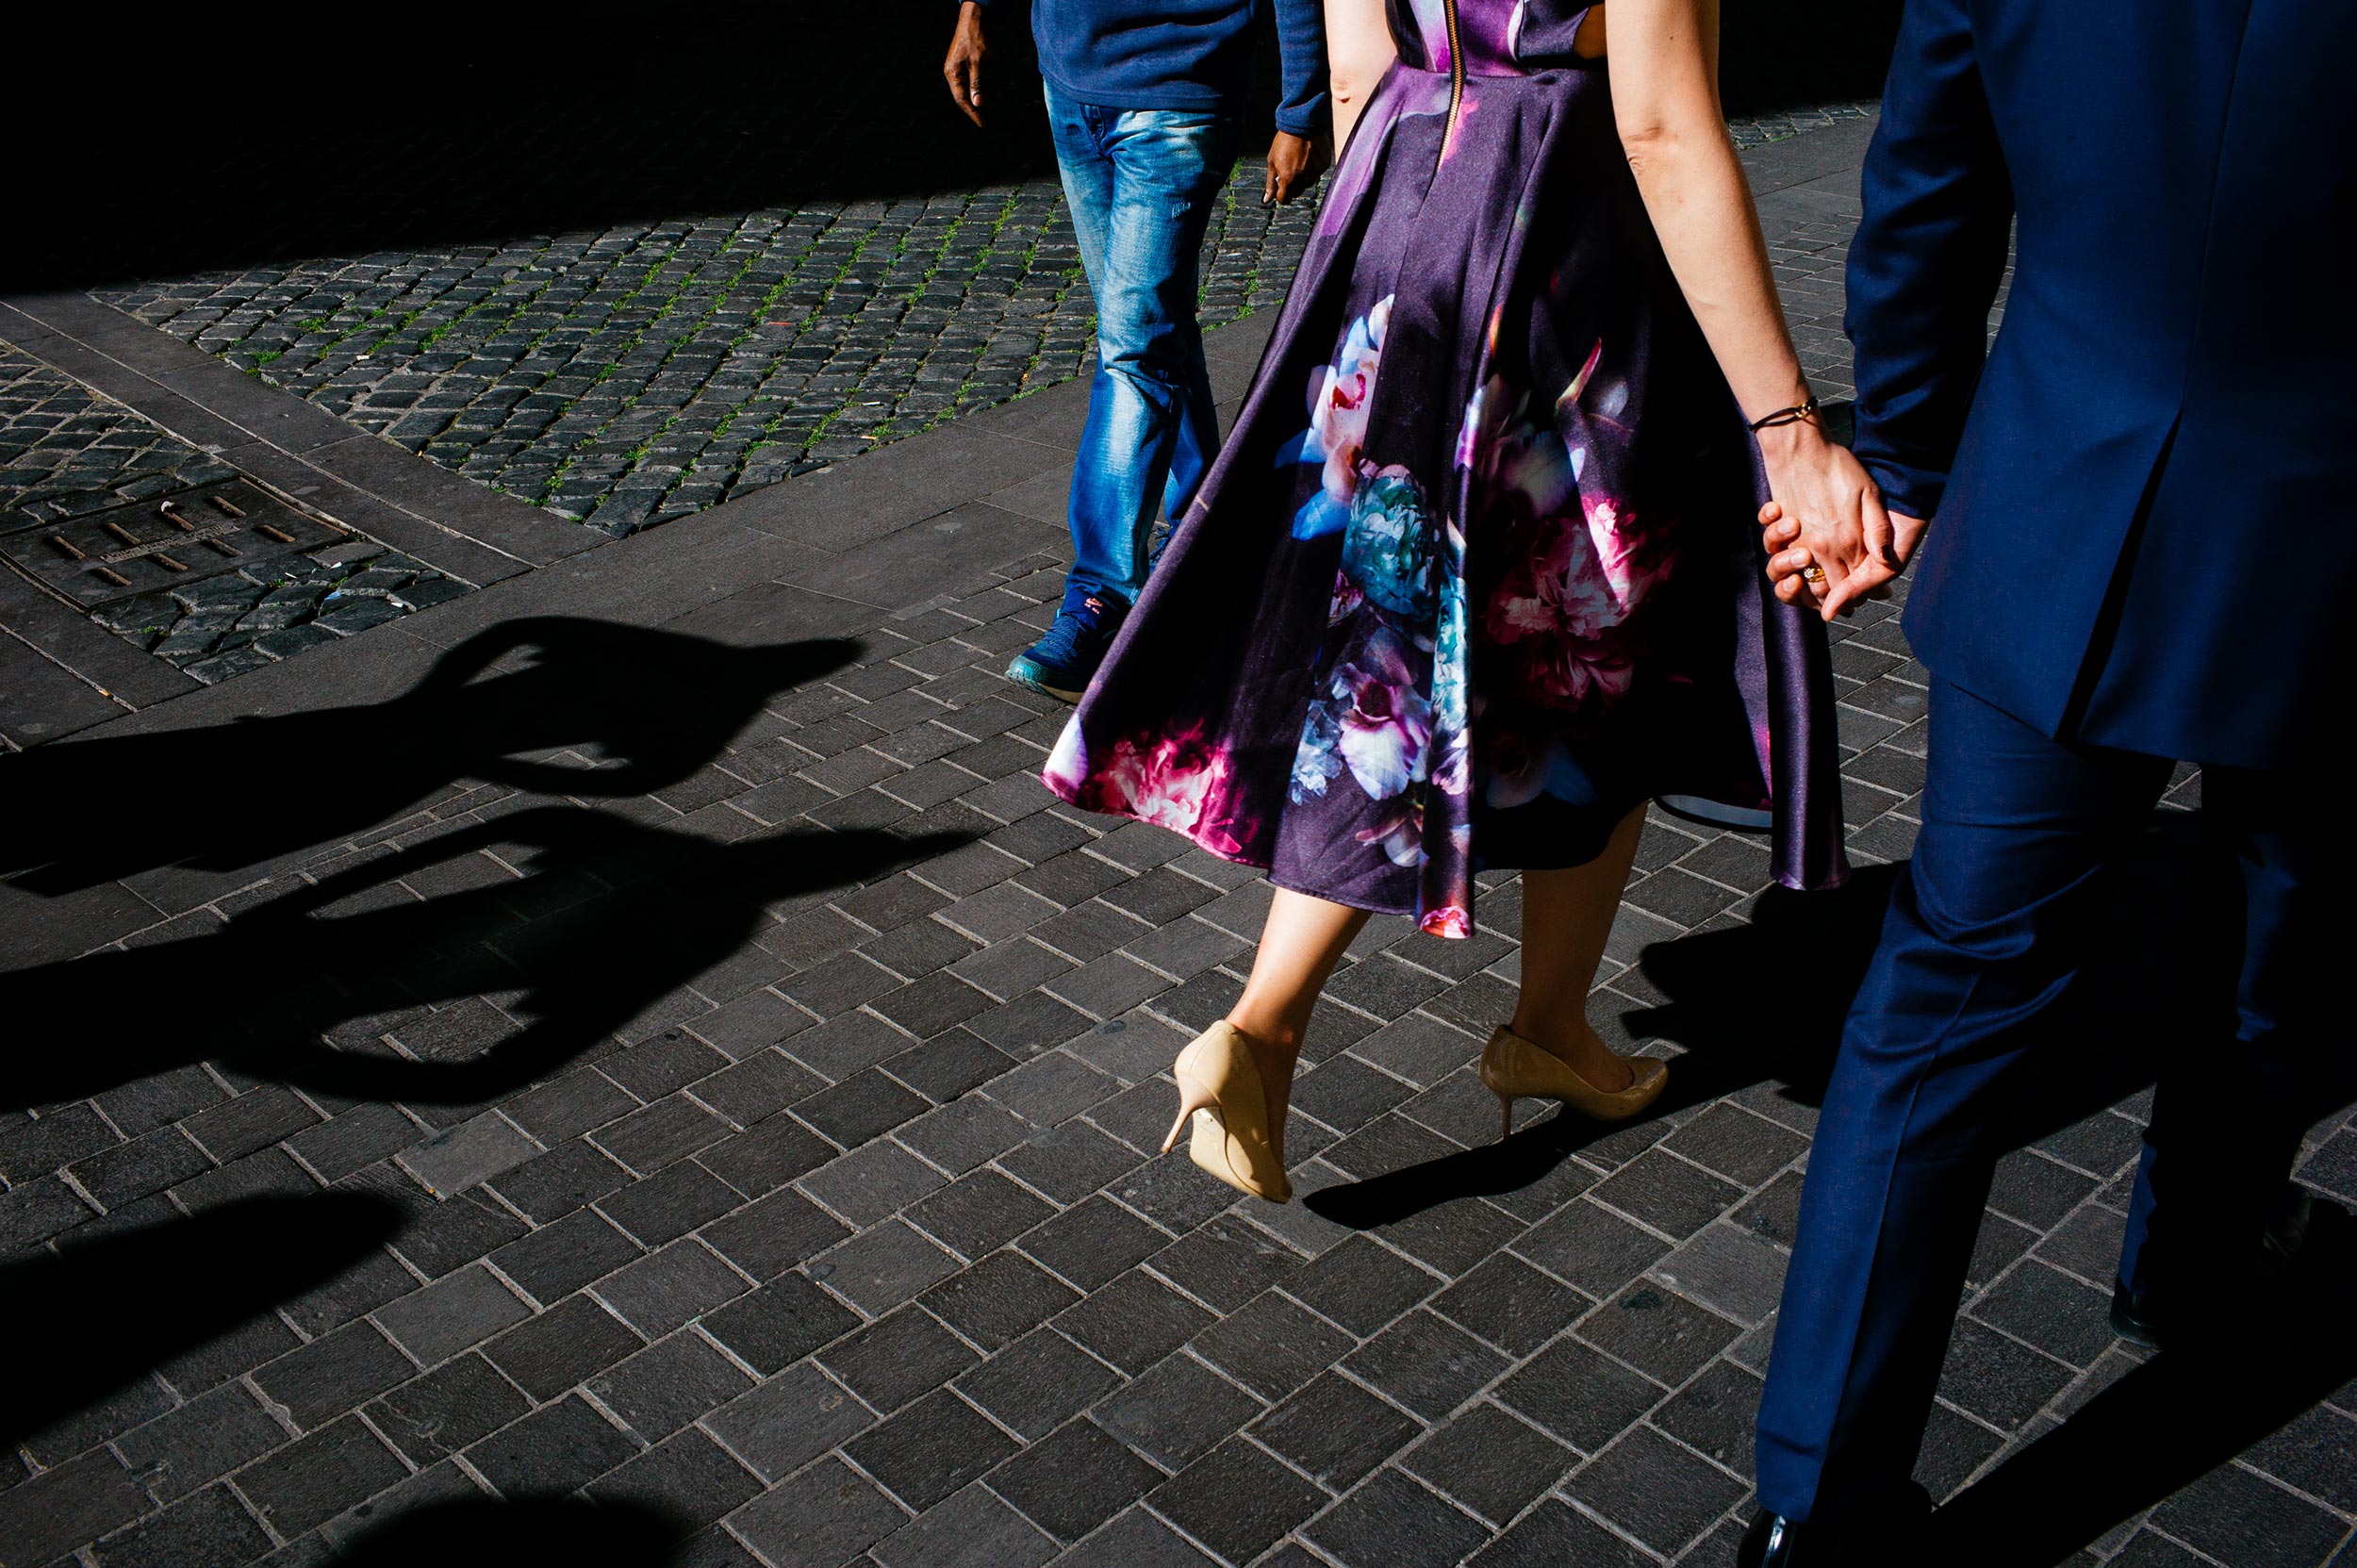 engagement-in-rome-couple-holding-by-the-hands-walking-the-shadow-of-two-passerbies-watching.jpg